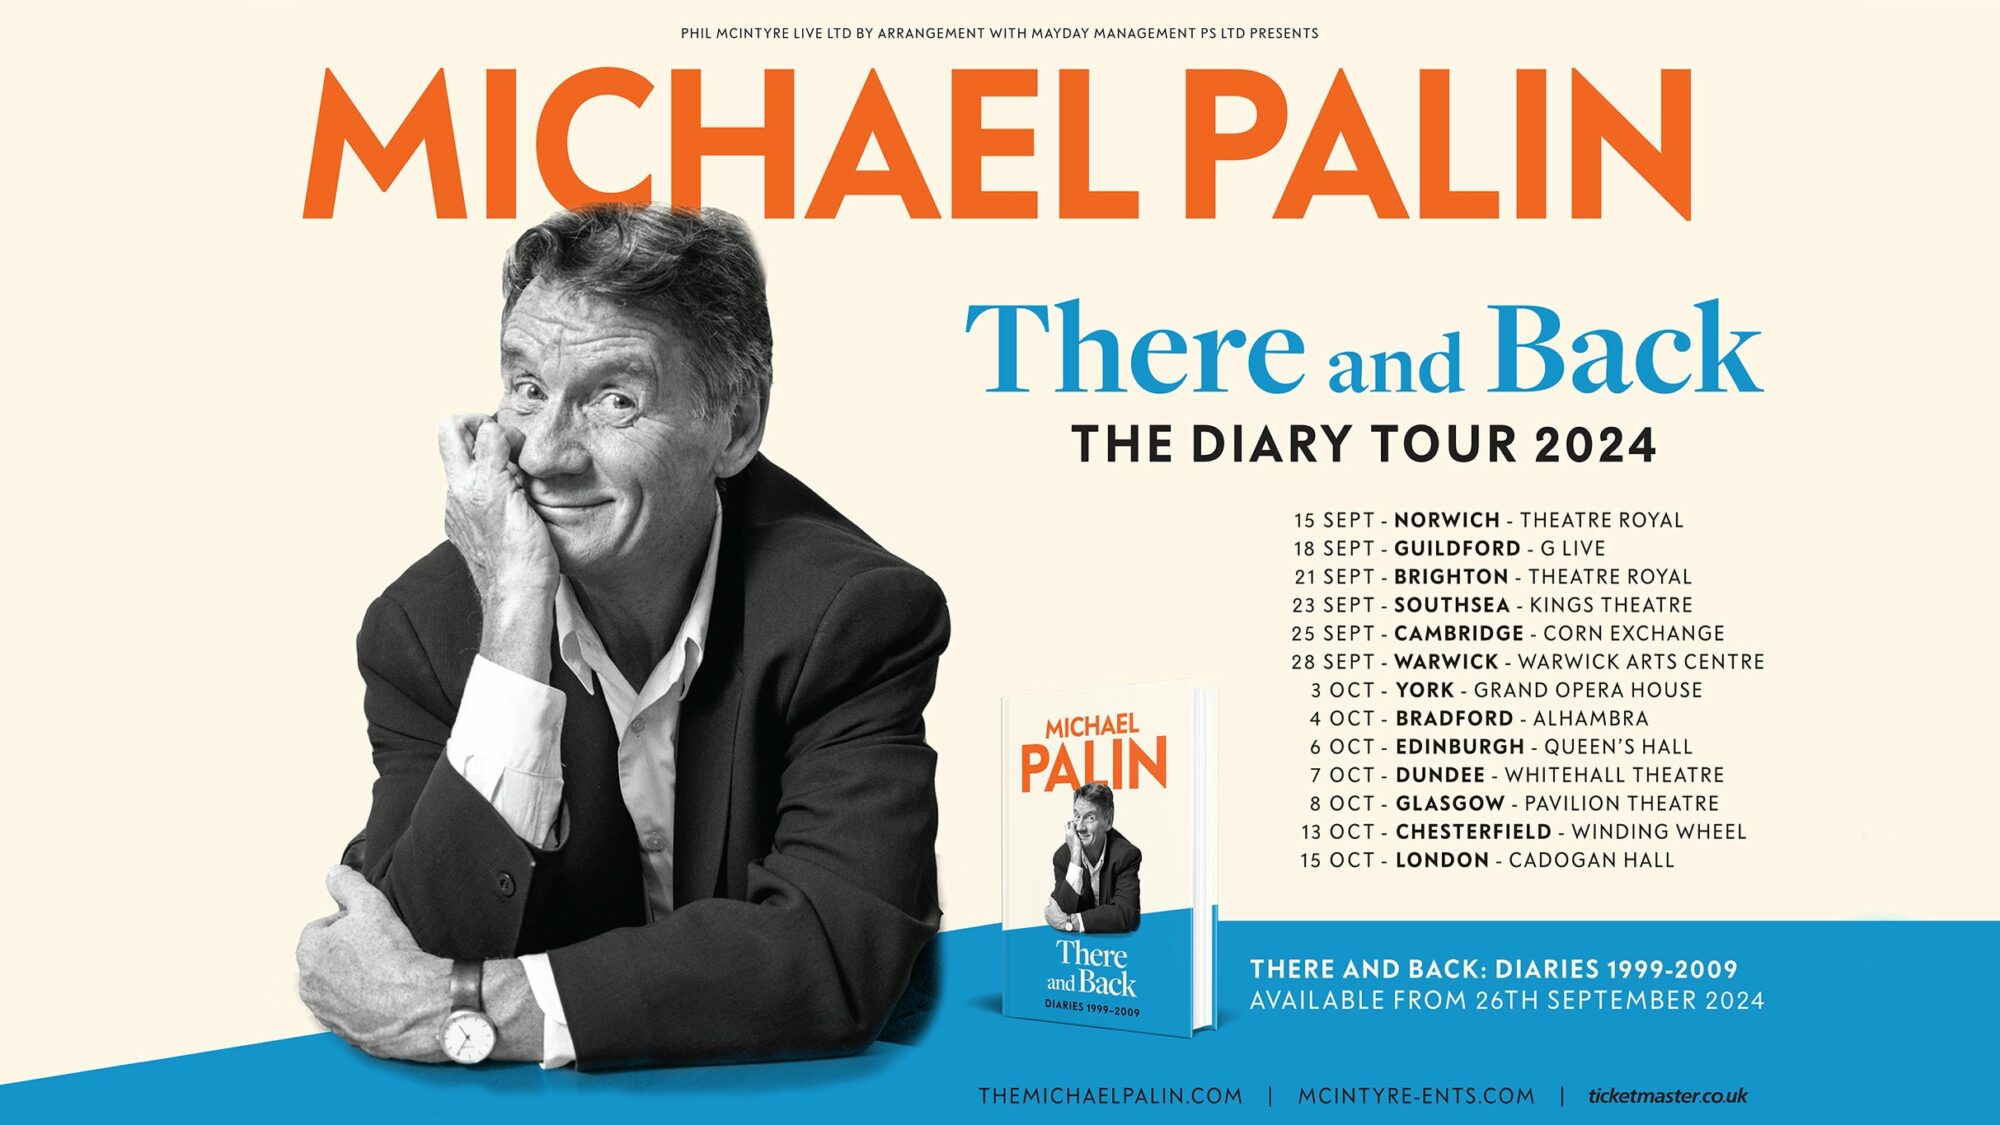 Image name Michael Palin There and Back at Alhambra Theatre Bradford the 1 image from the post Michael Palin: There and Back at Grand Opera House, York, York in Yorkshire.com.